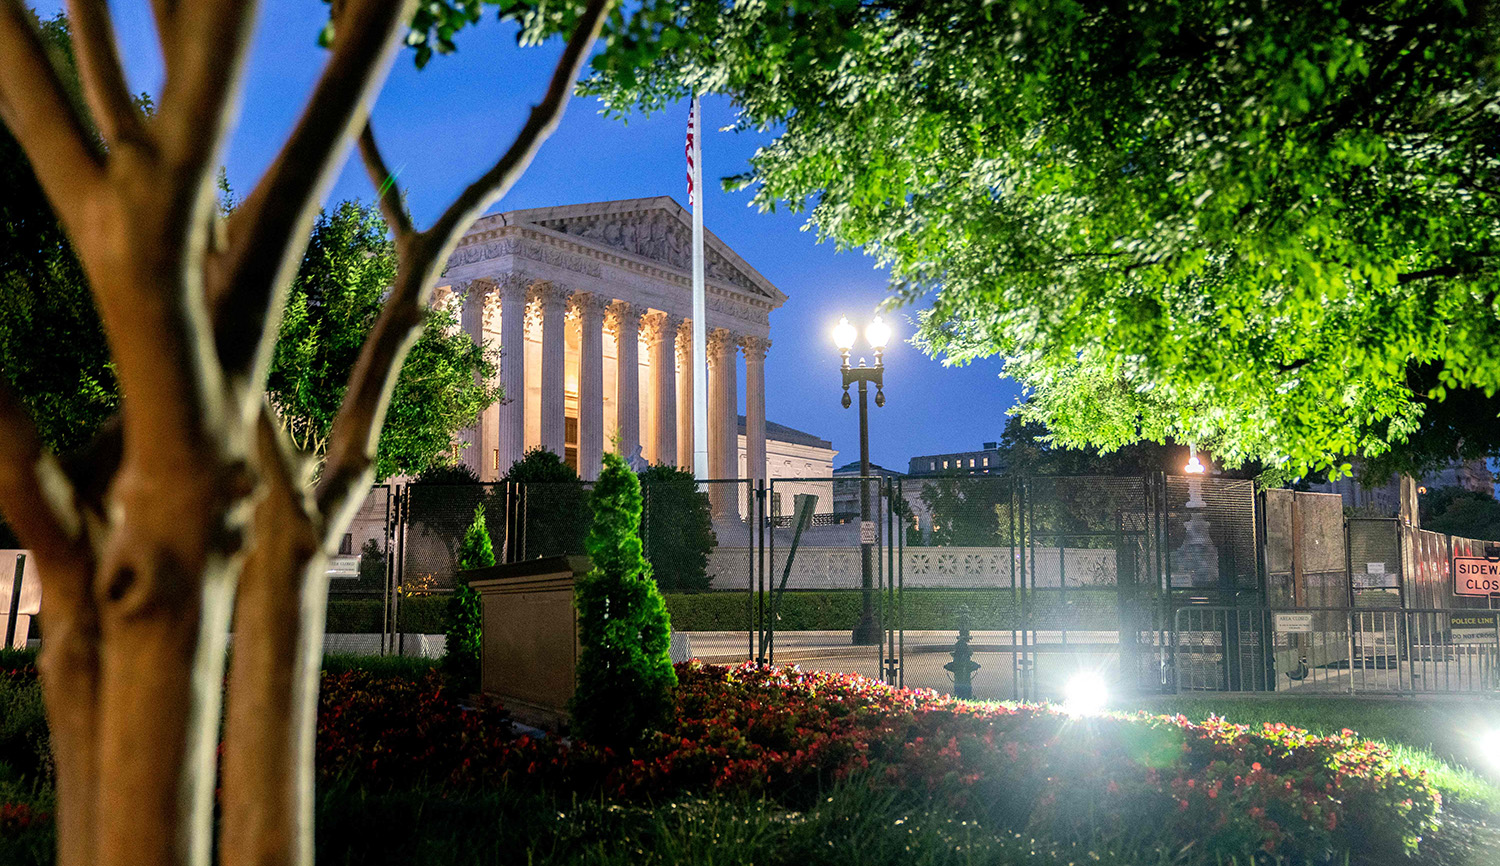 
Temporary security fencing surrounds the Supreme Court in Washington, D.C., on June 21, 2022.  STEFANI REYNOLDS/AFP via Getty Images.






